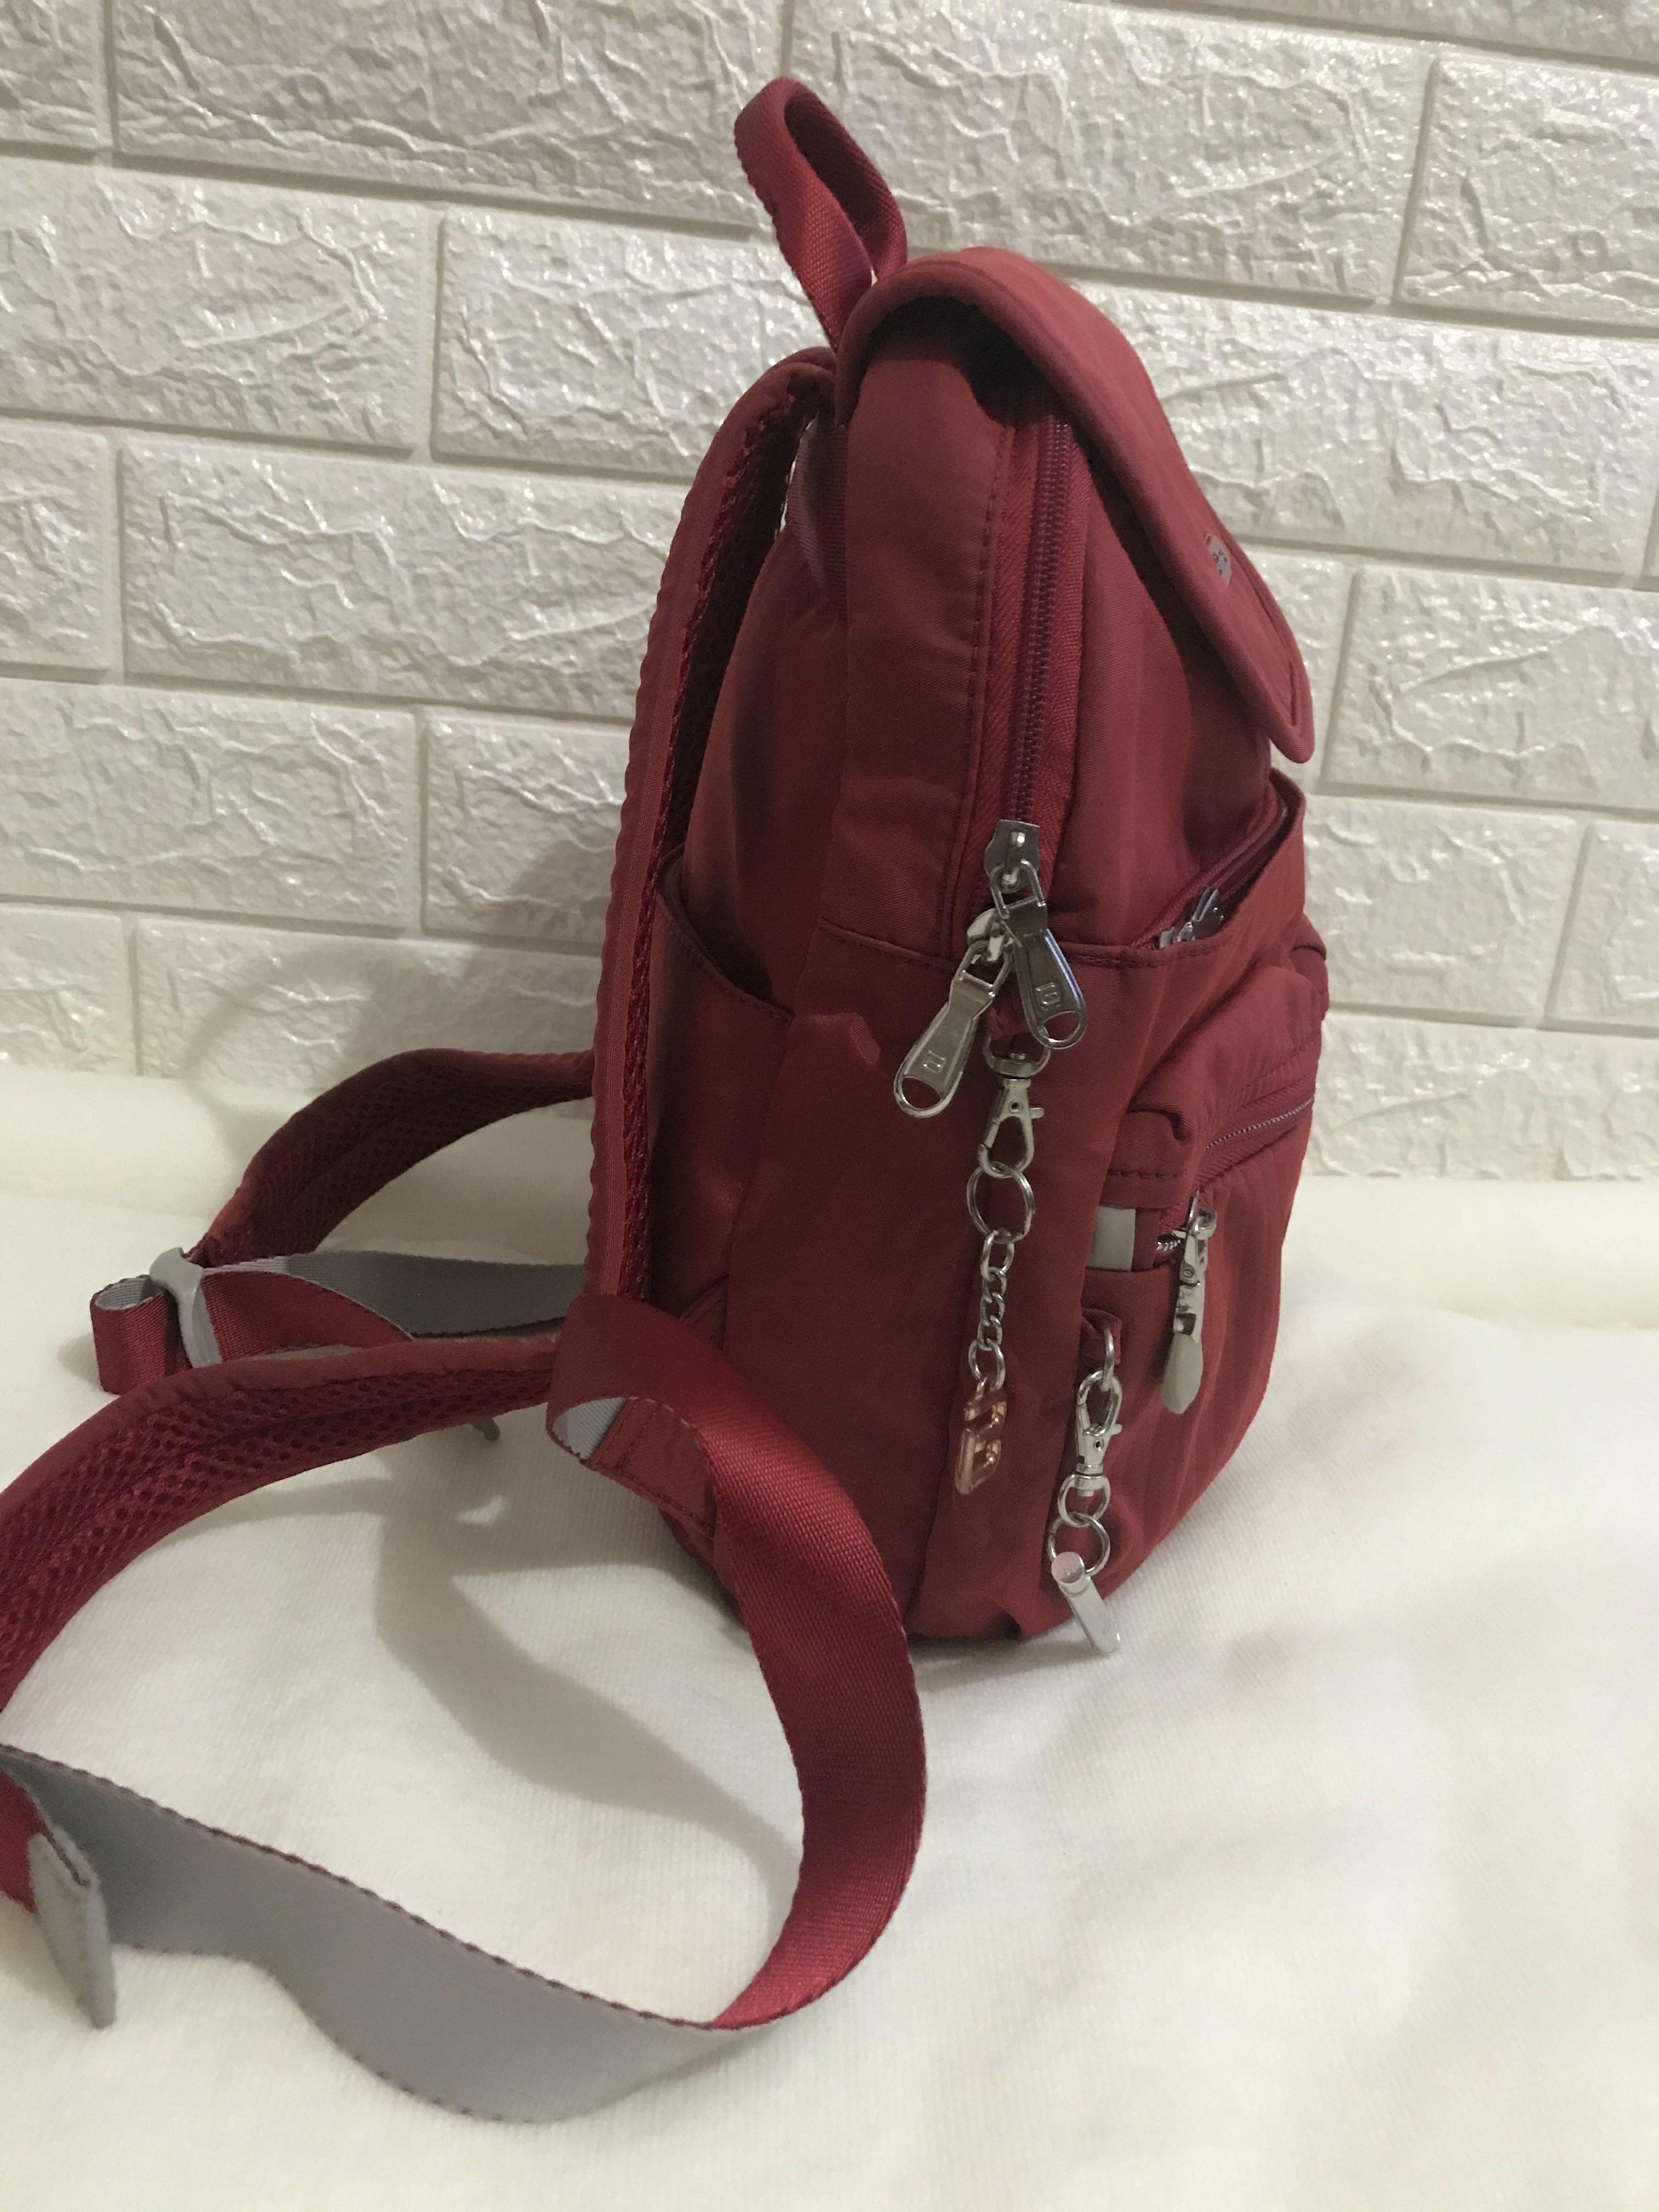 𝘎𝘖𝘠𝘈𝘙𝘋 𝘈𝘓𝘗𝘐𝘕 MM Backpack, Luxury, Bags & Wallets on Carousell